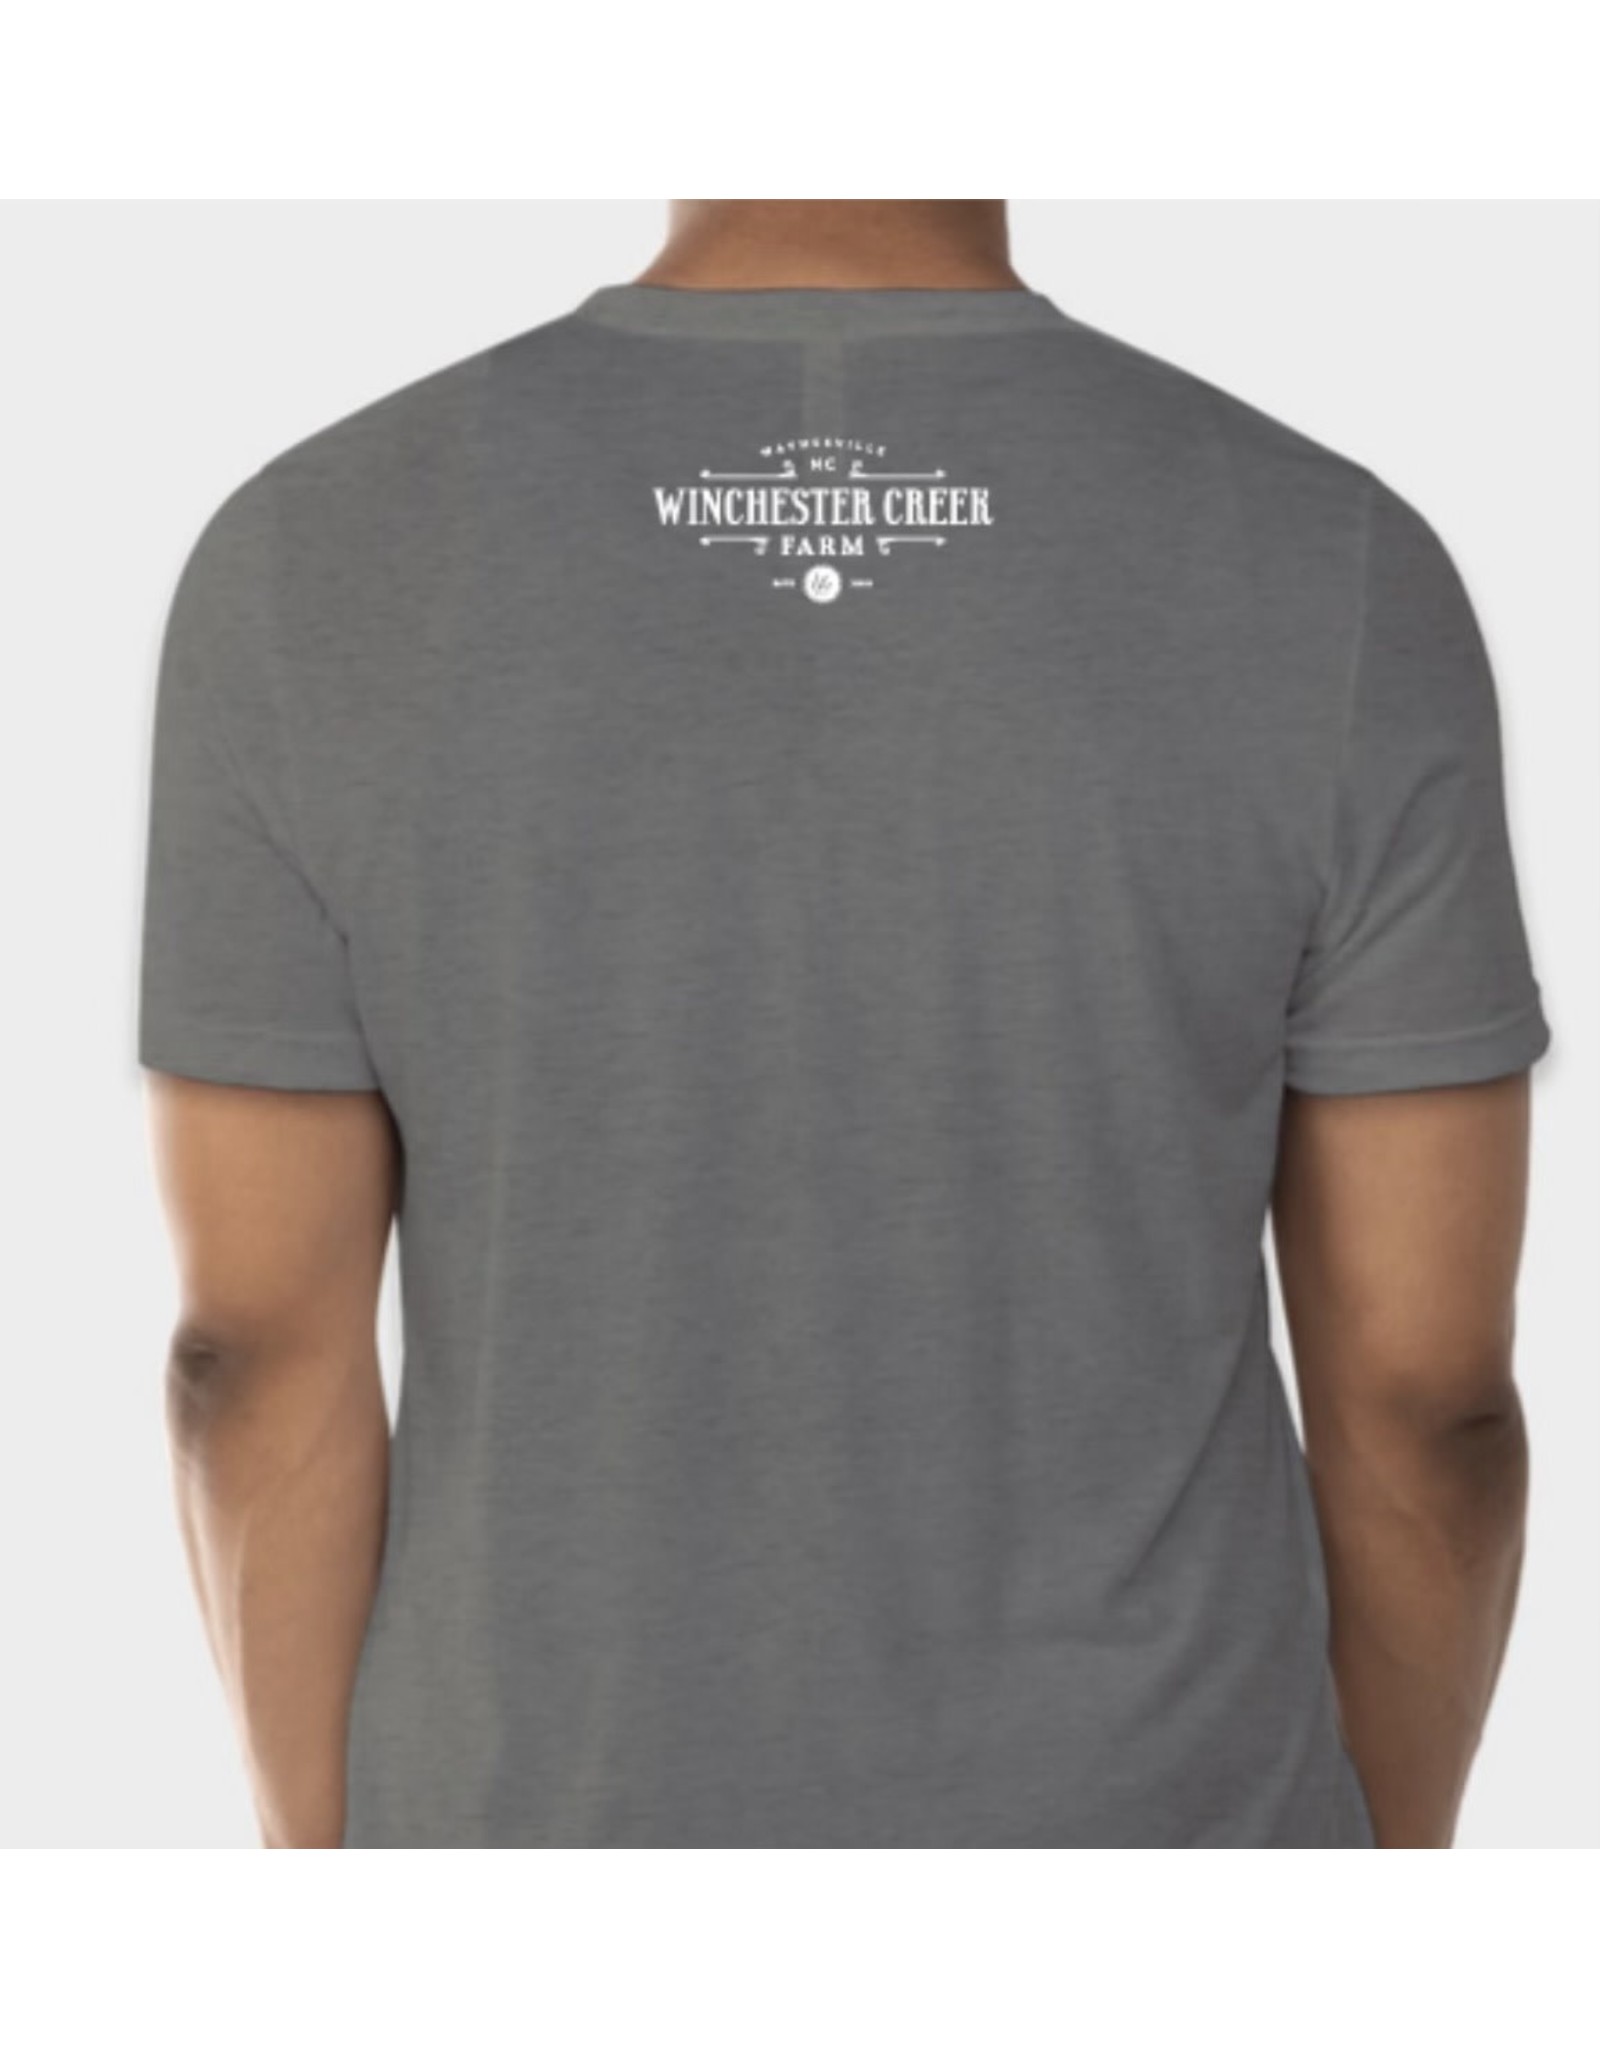 WCF Branded Apparel Keep Calm & Noodle On T-shirt - Gray